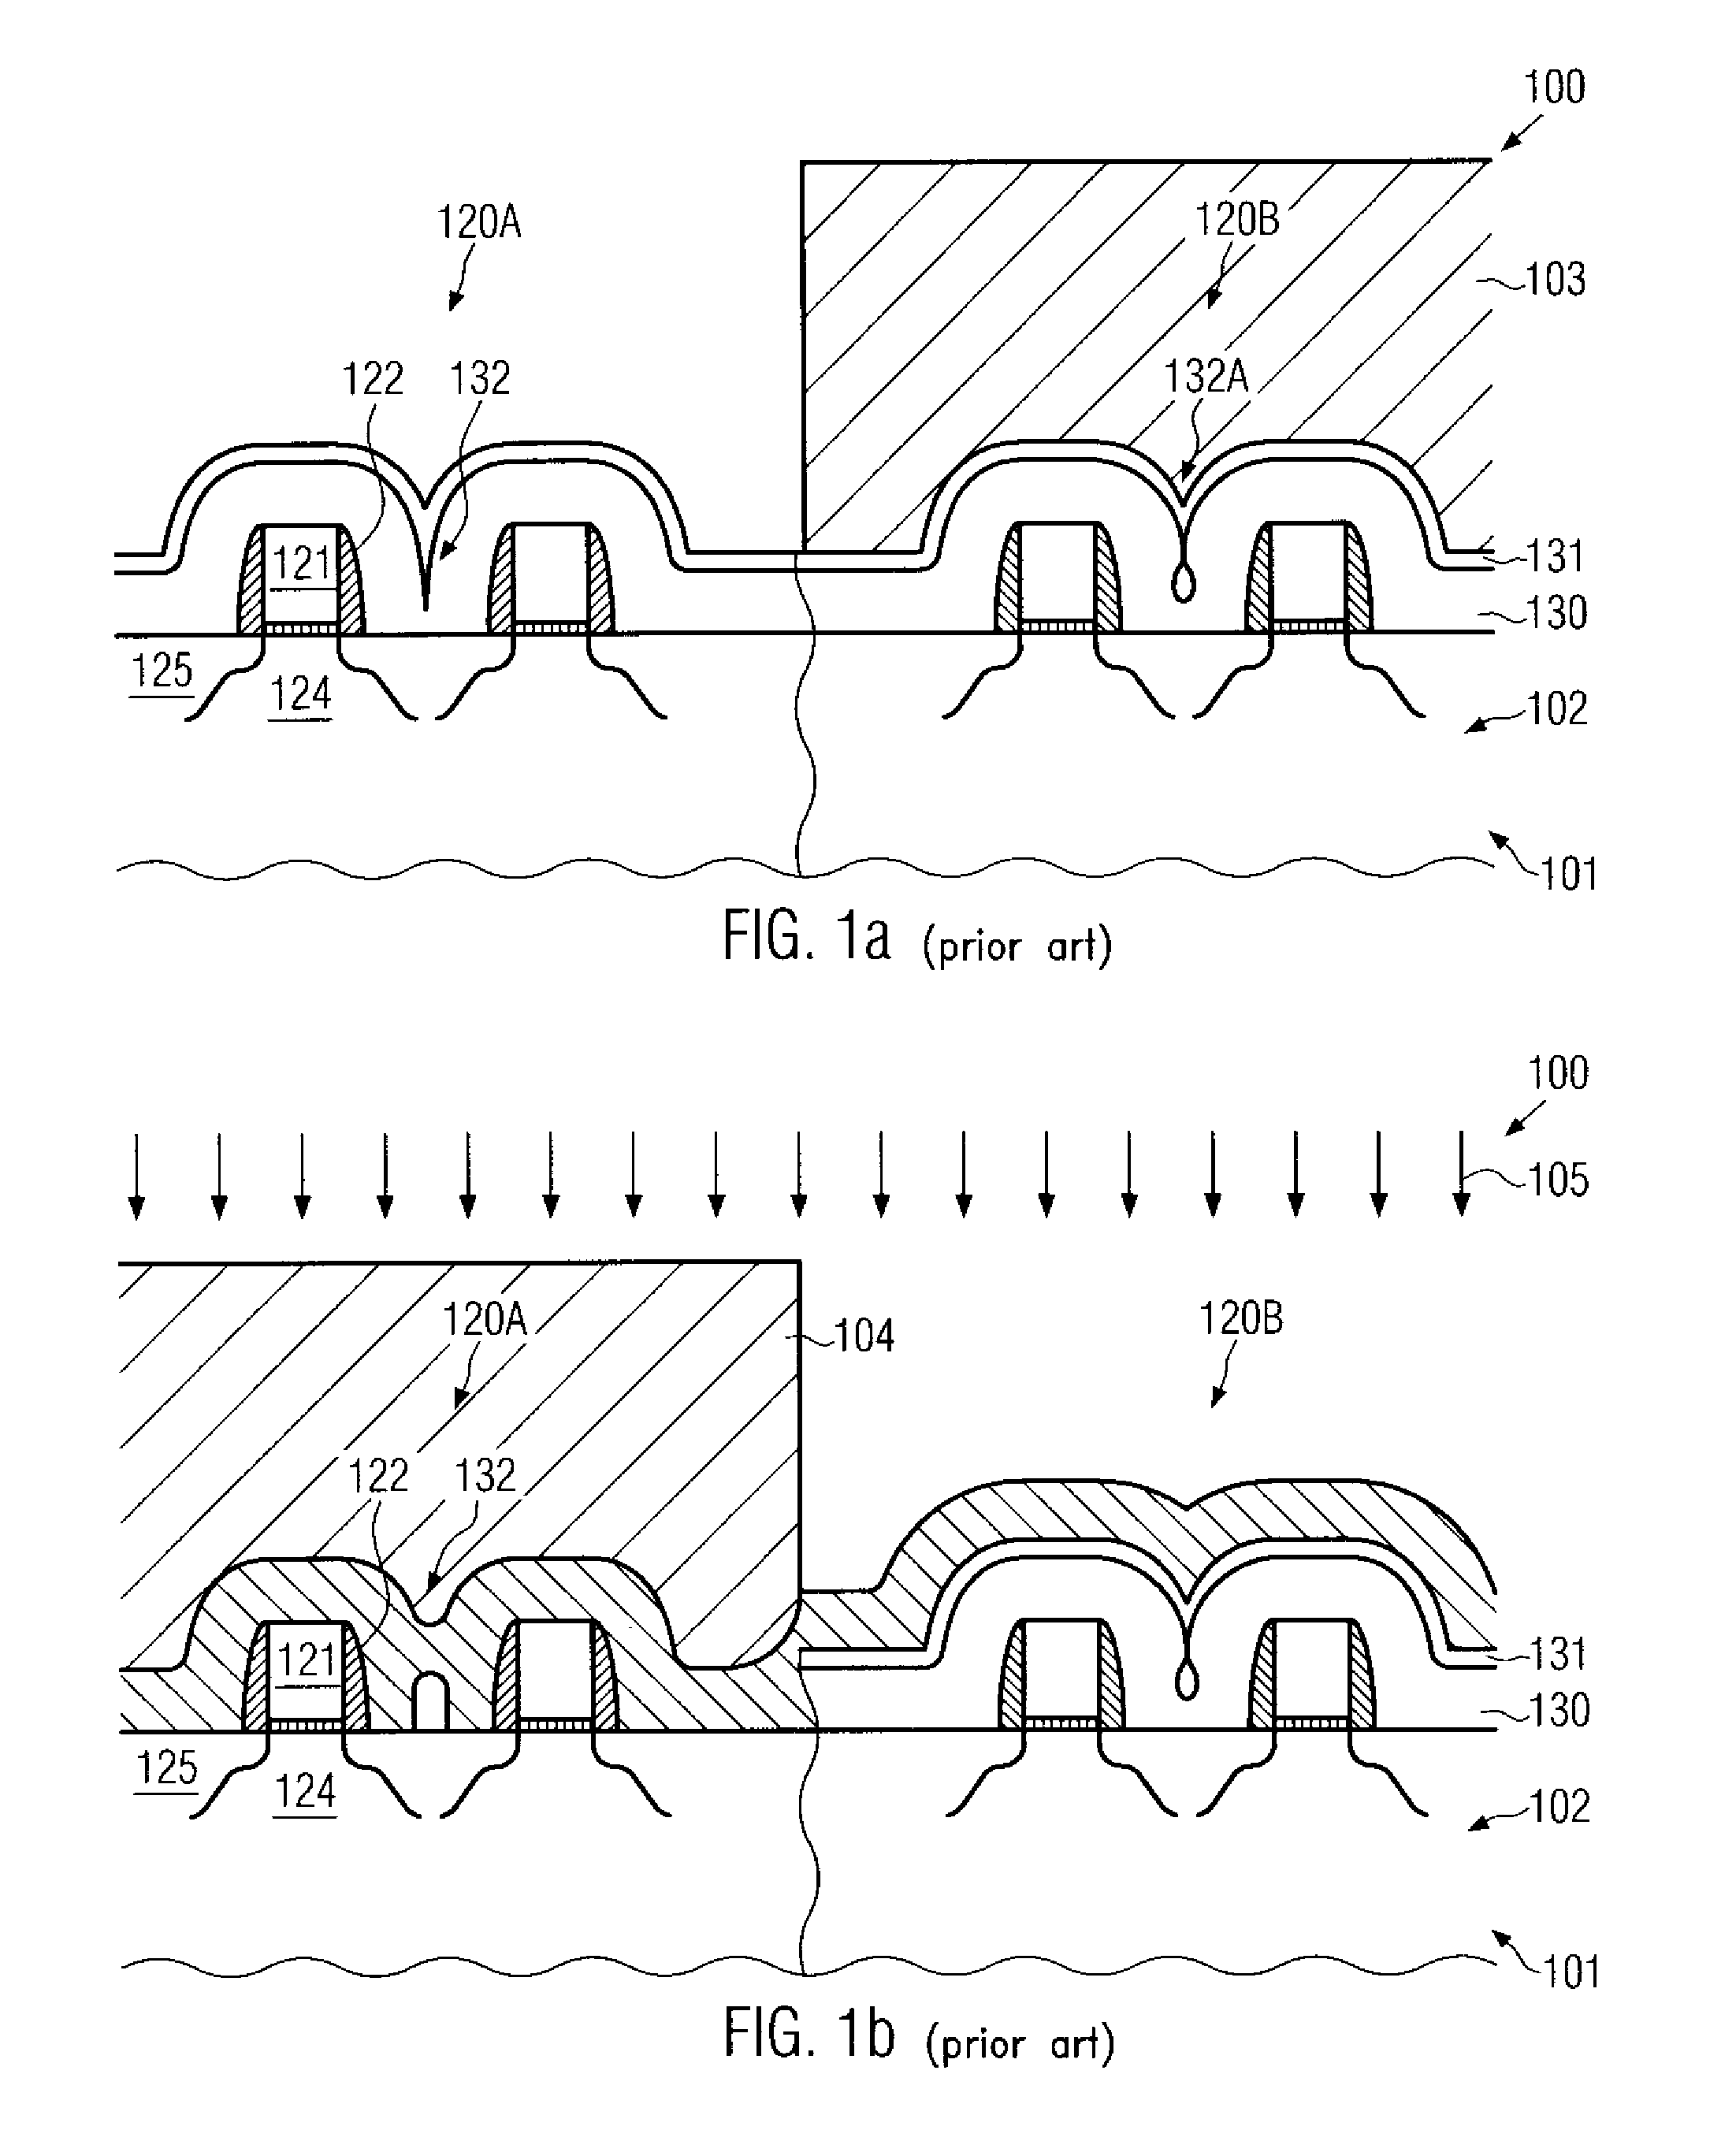 Stress transfer in an interlayer dielectric by providing a stressed dielectric layer above a stress-neutral dielectric material in a semiconductor device